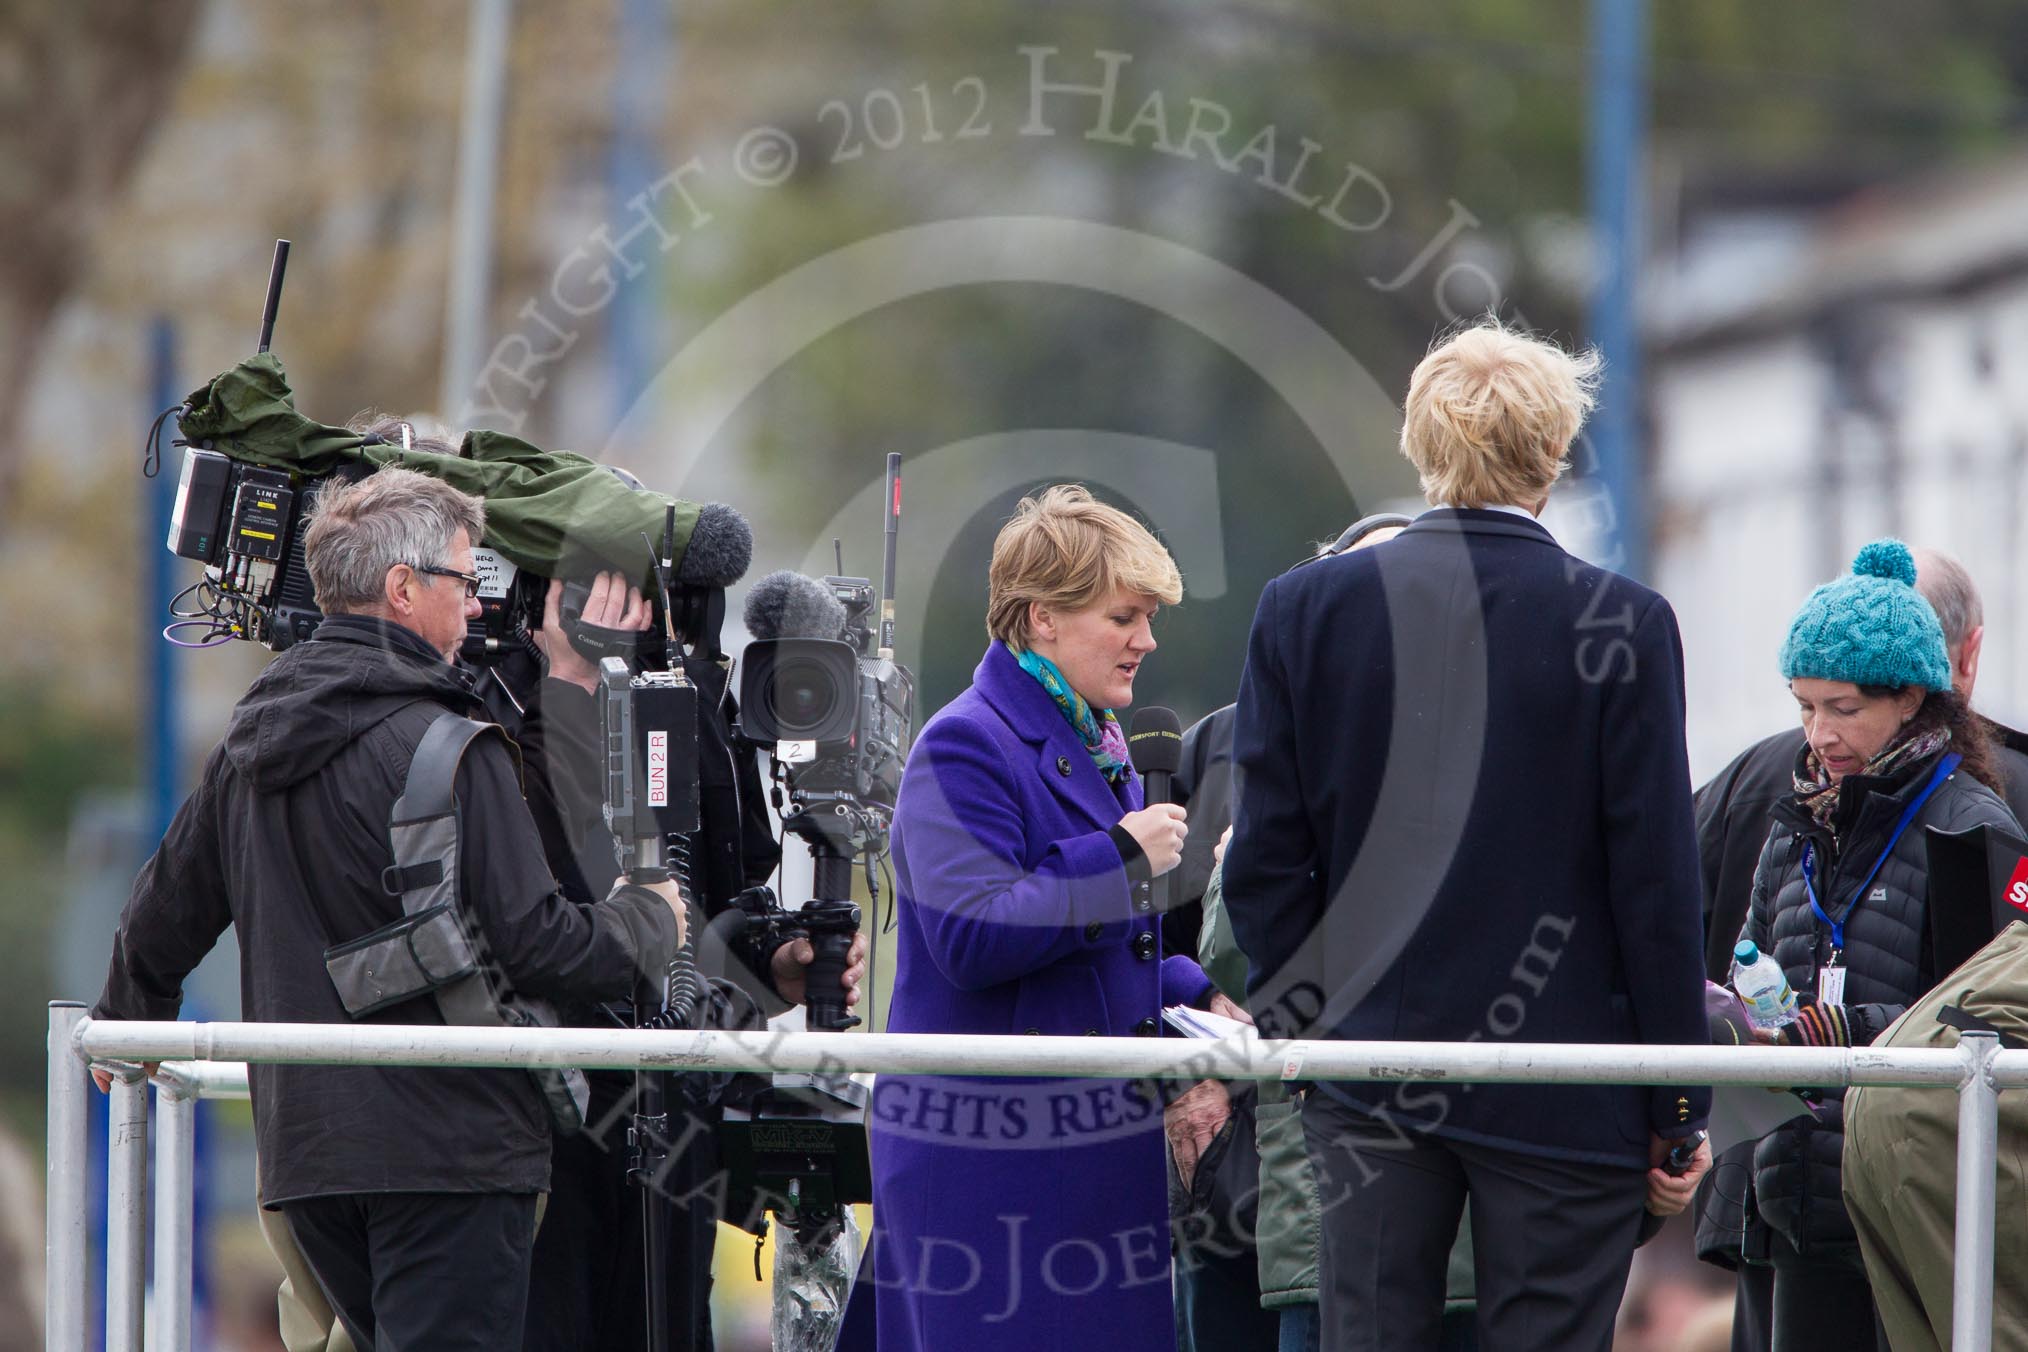 The Boat Race 2012: BBC presenter Clair Balding doing an interview just before the start of the 2012 Boat Race..




on 07 April 2012 at 13:59, image #206